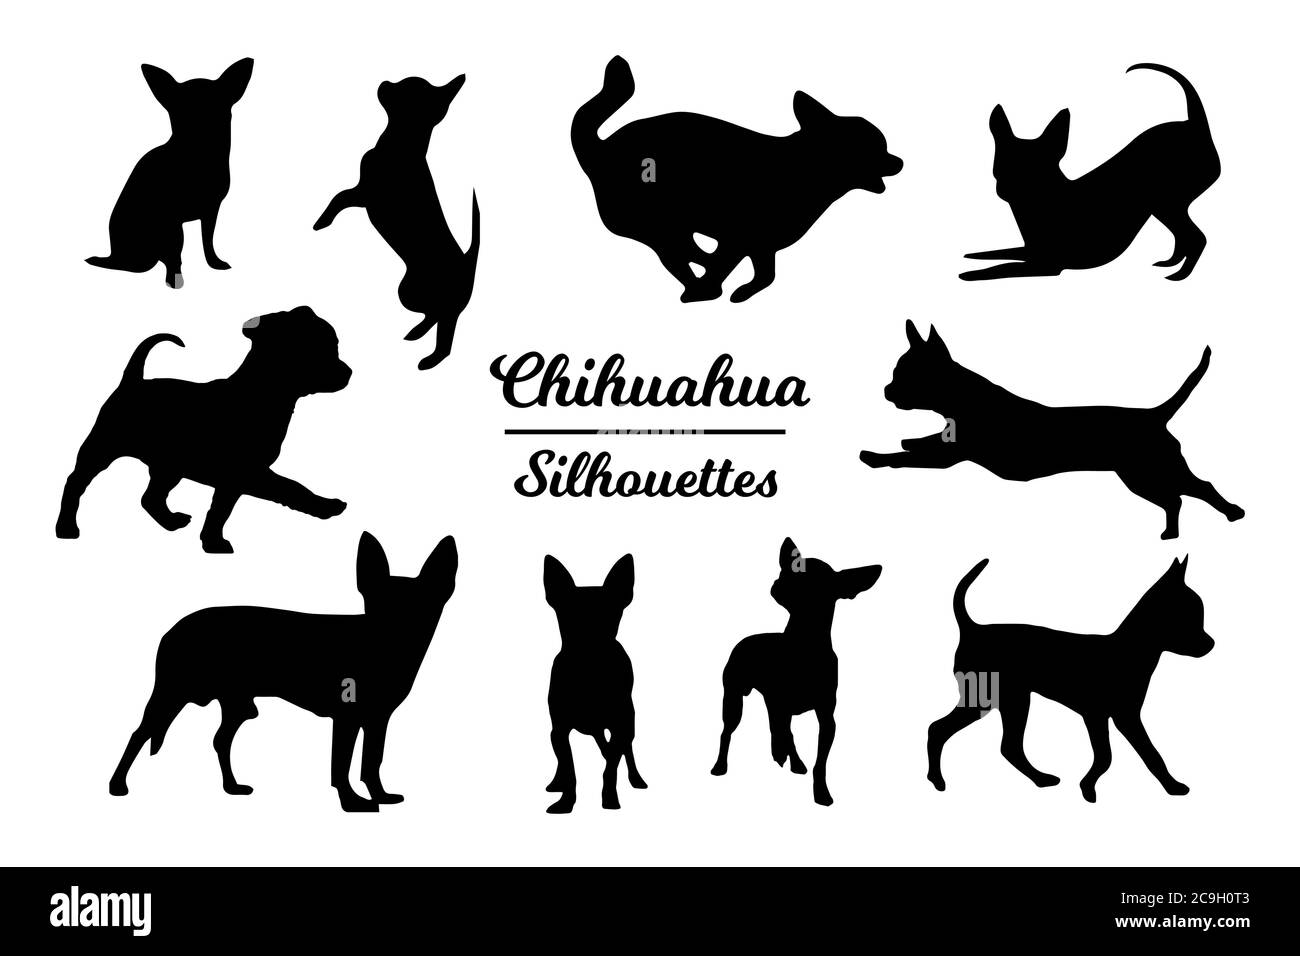 Chihuahua Dog Silhouettes Black And White Outline Stock Vector Image Art Alamy